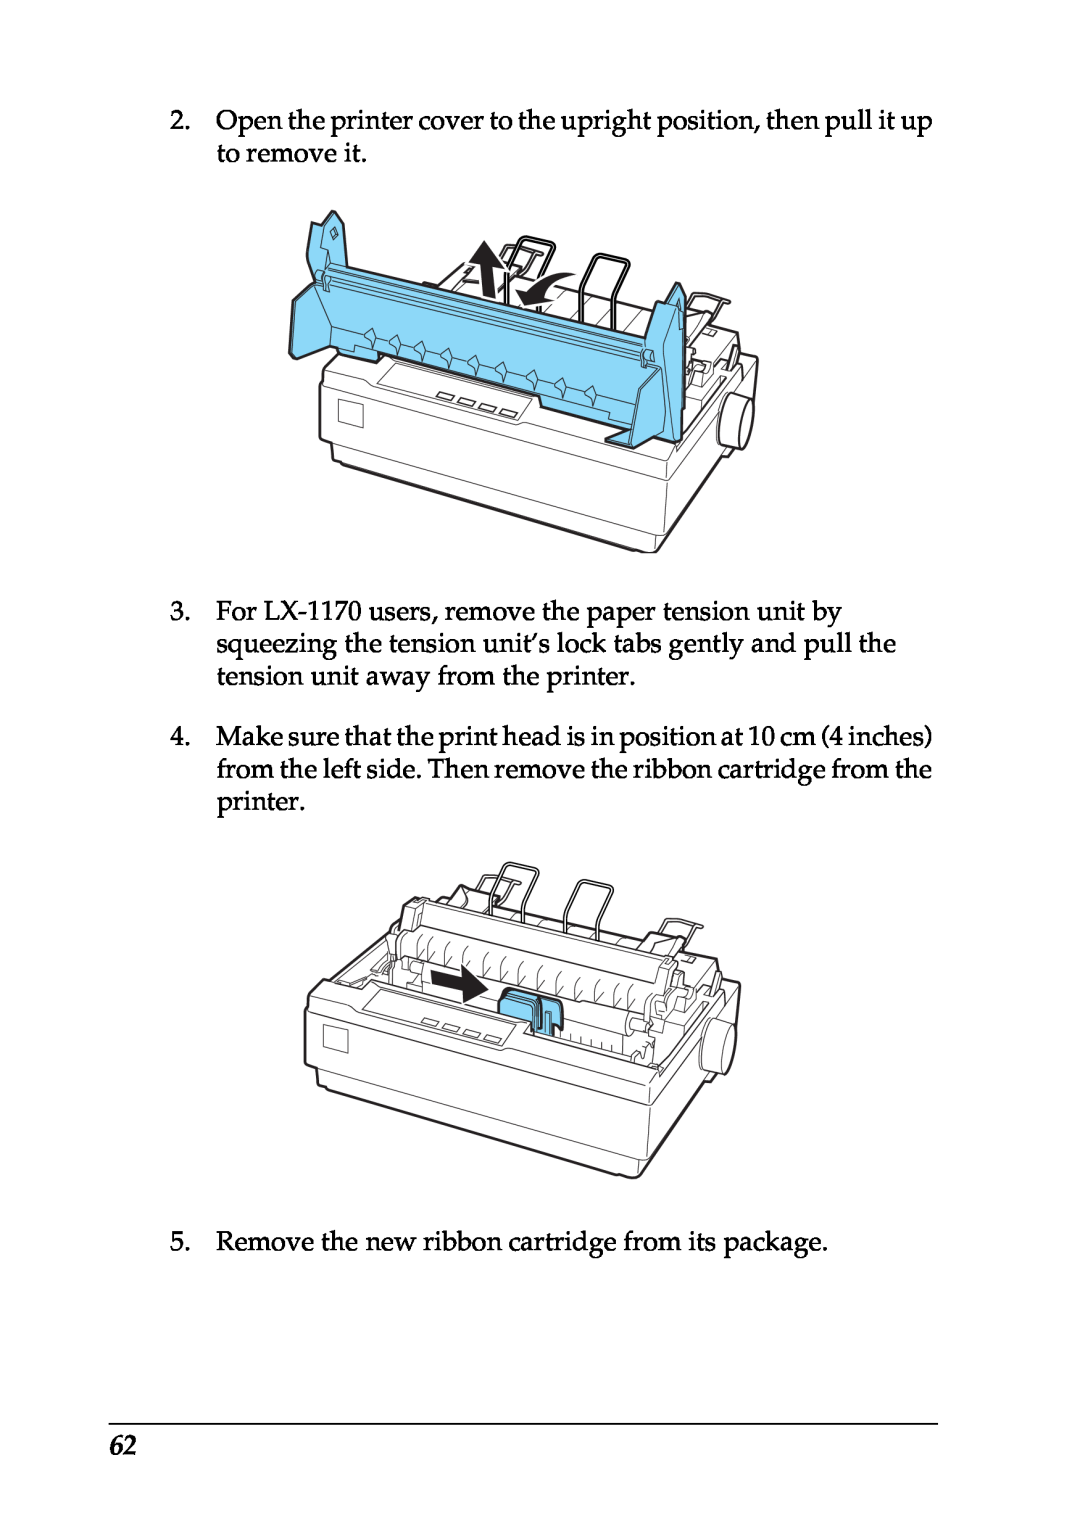 Epson LX-1170 manual Remove the new ribbon cartridge from its package 